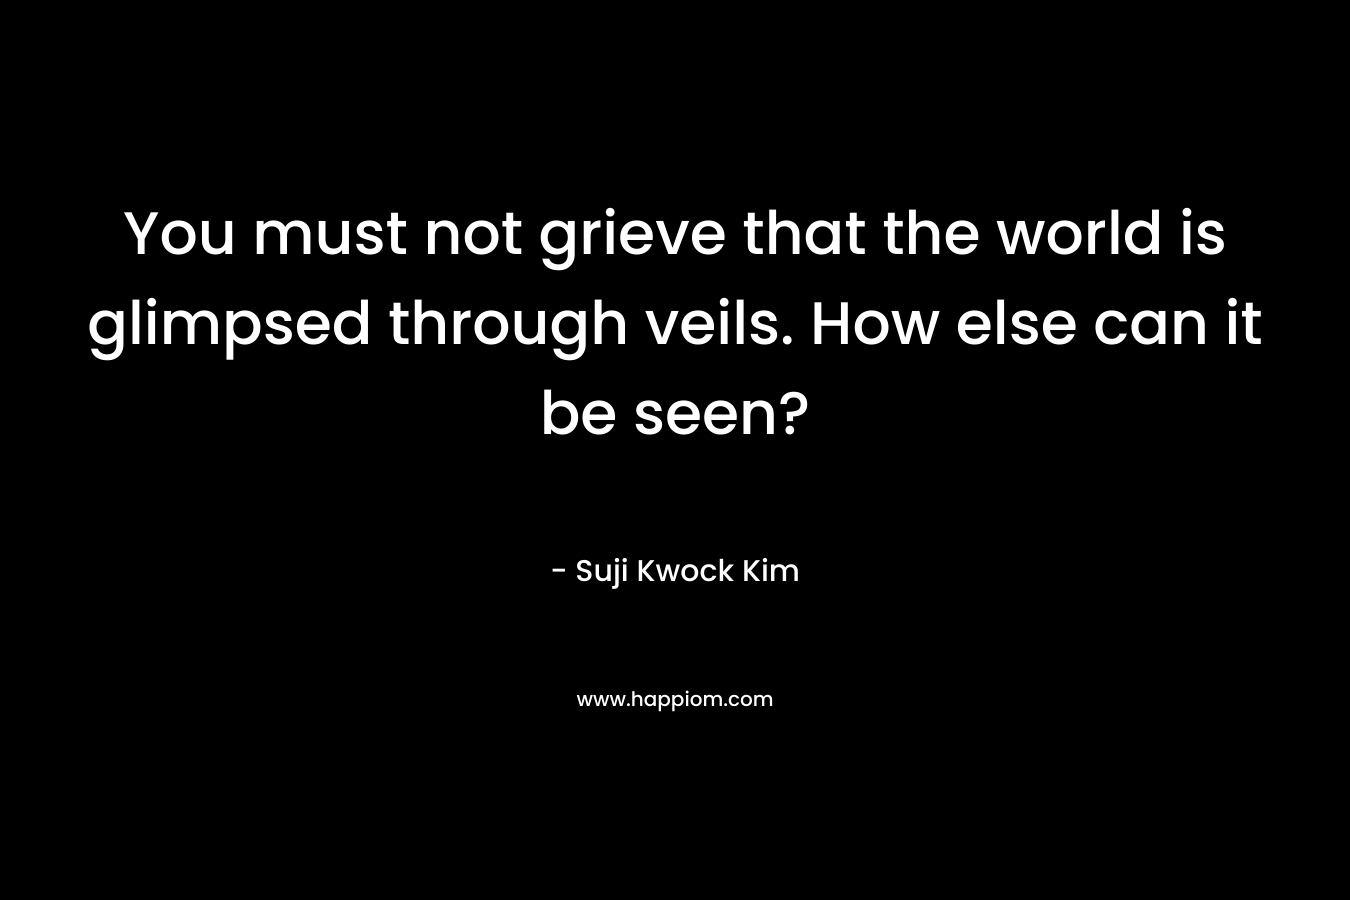 You must not grieve that the world is glimpsed through veils. How else can it be seen?